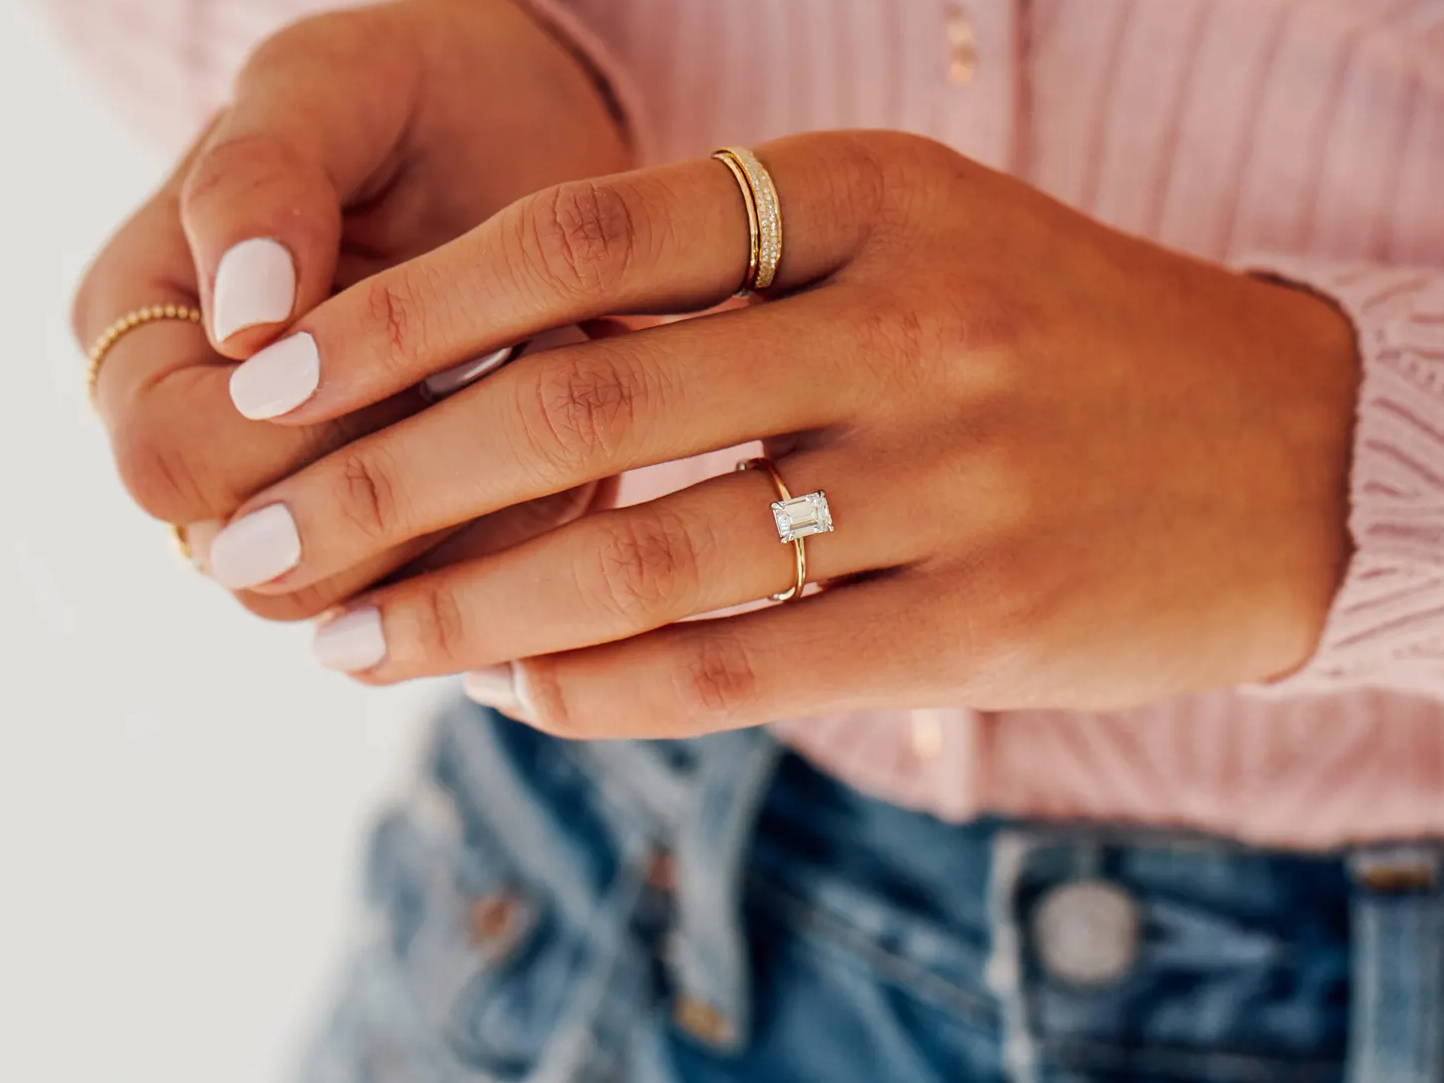 Tips On How To Care For Your Engagement Ring